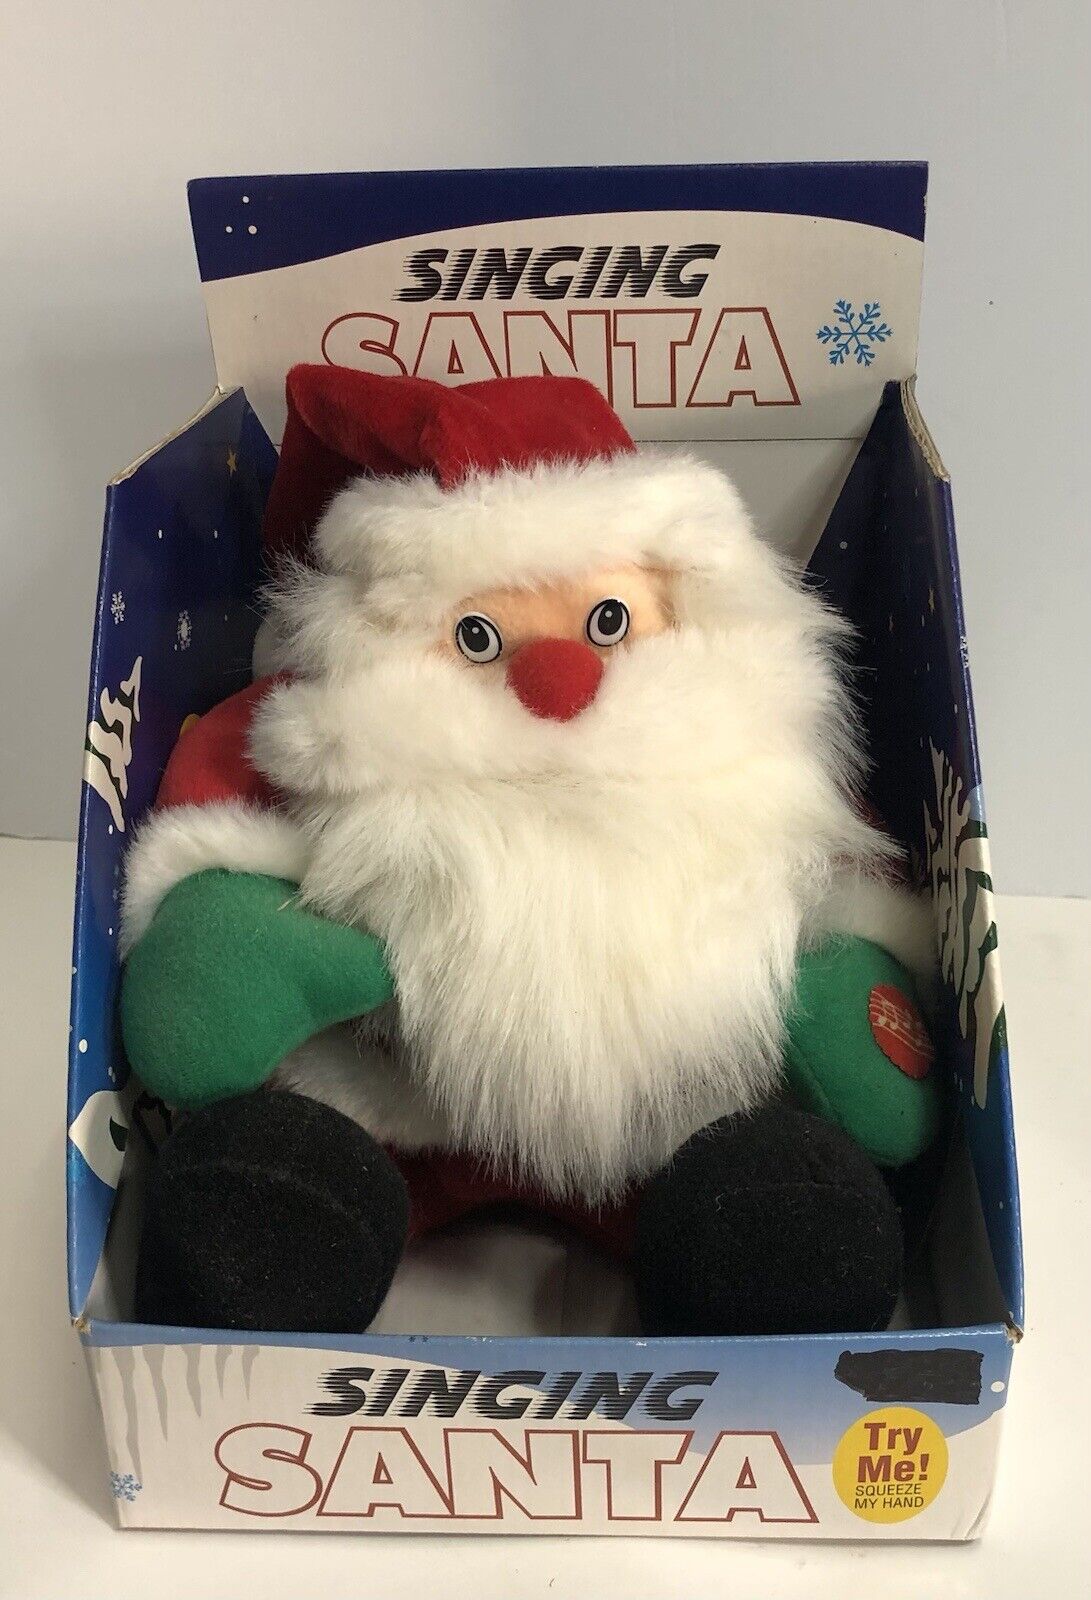 VTG Animatronic Santa Claus Plush Sings Jingle Bells. Not Tested. Comes As Is